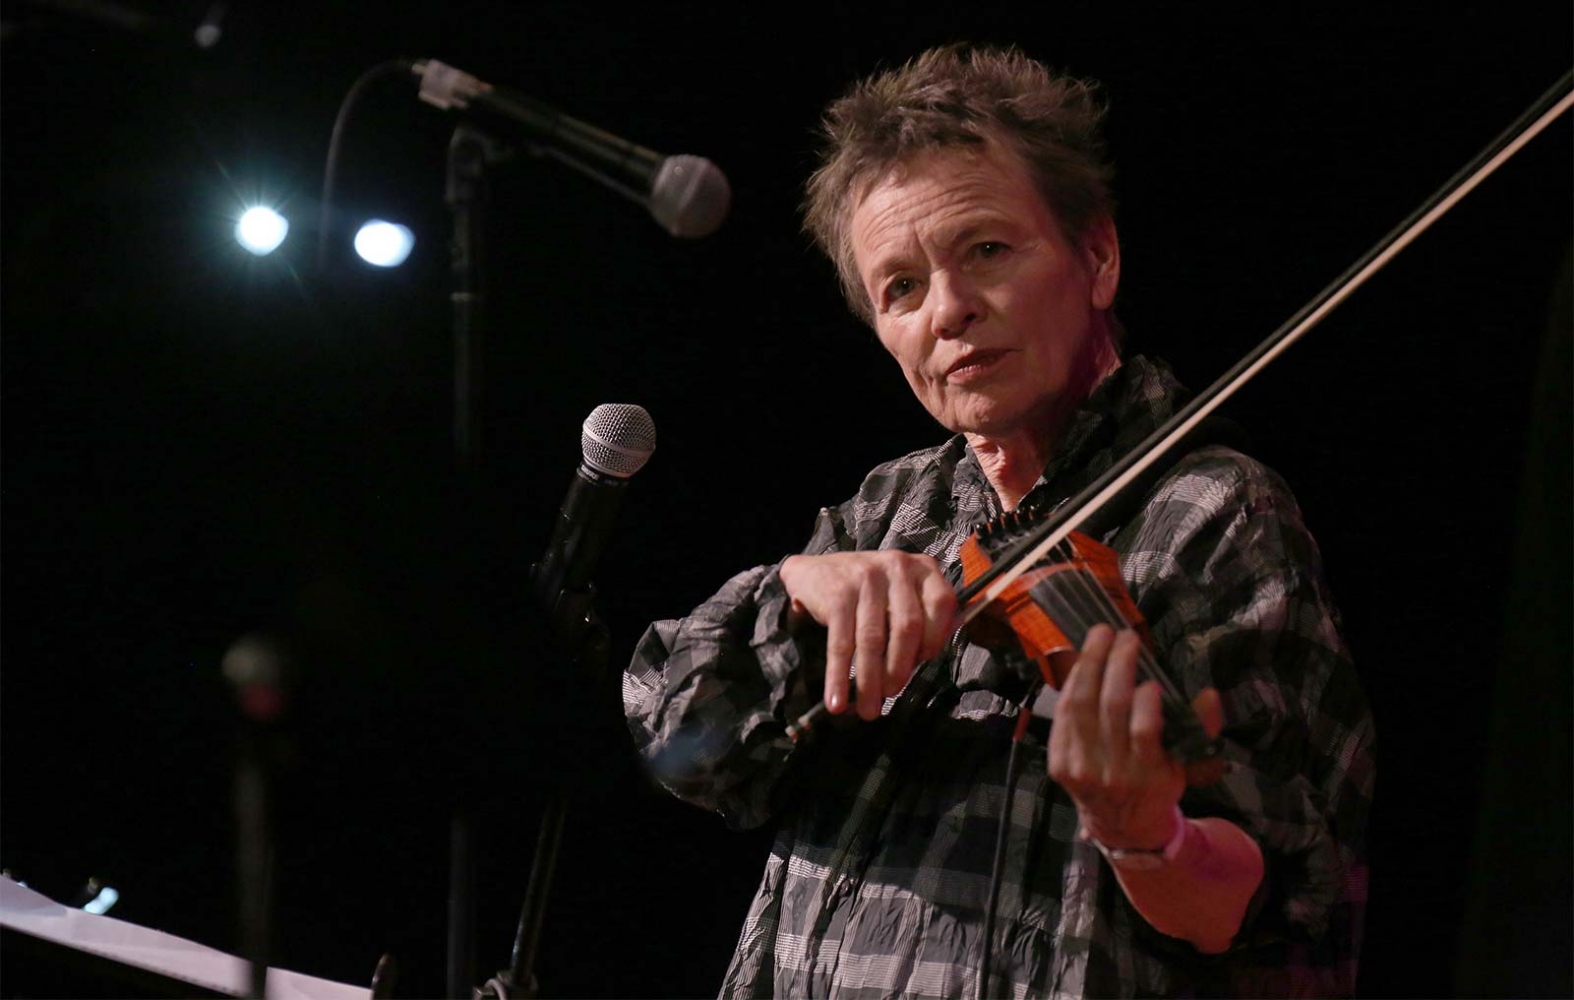 Image from Entertainment - Laurie Anderson